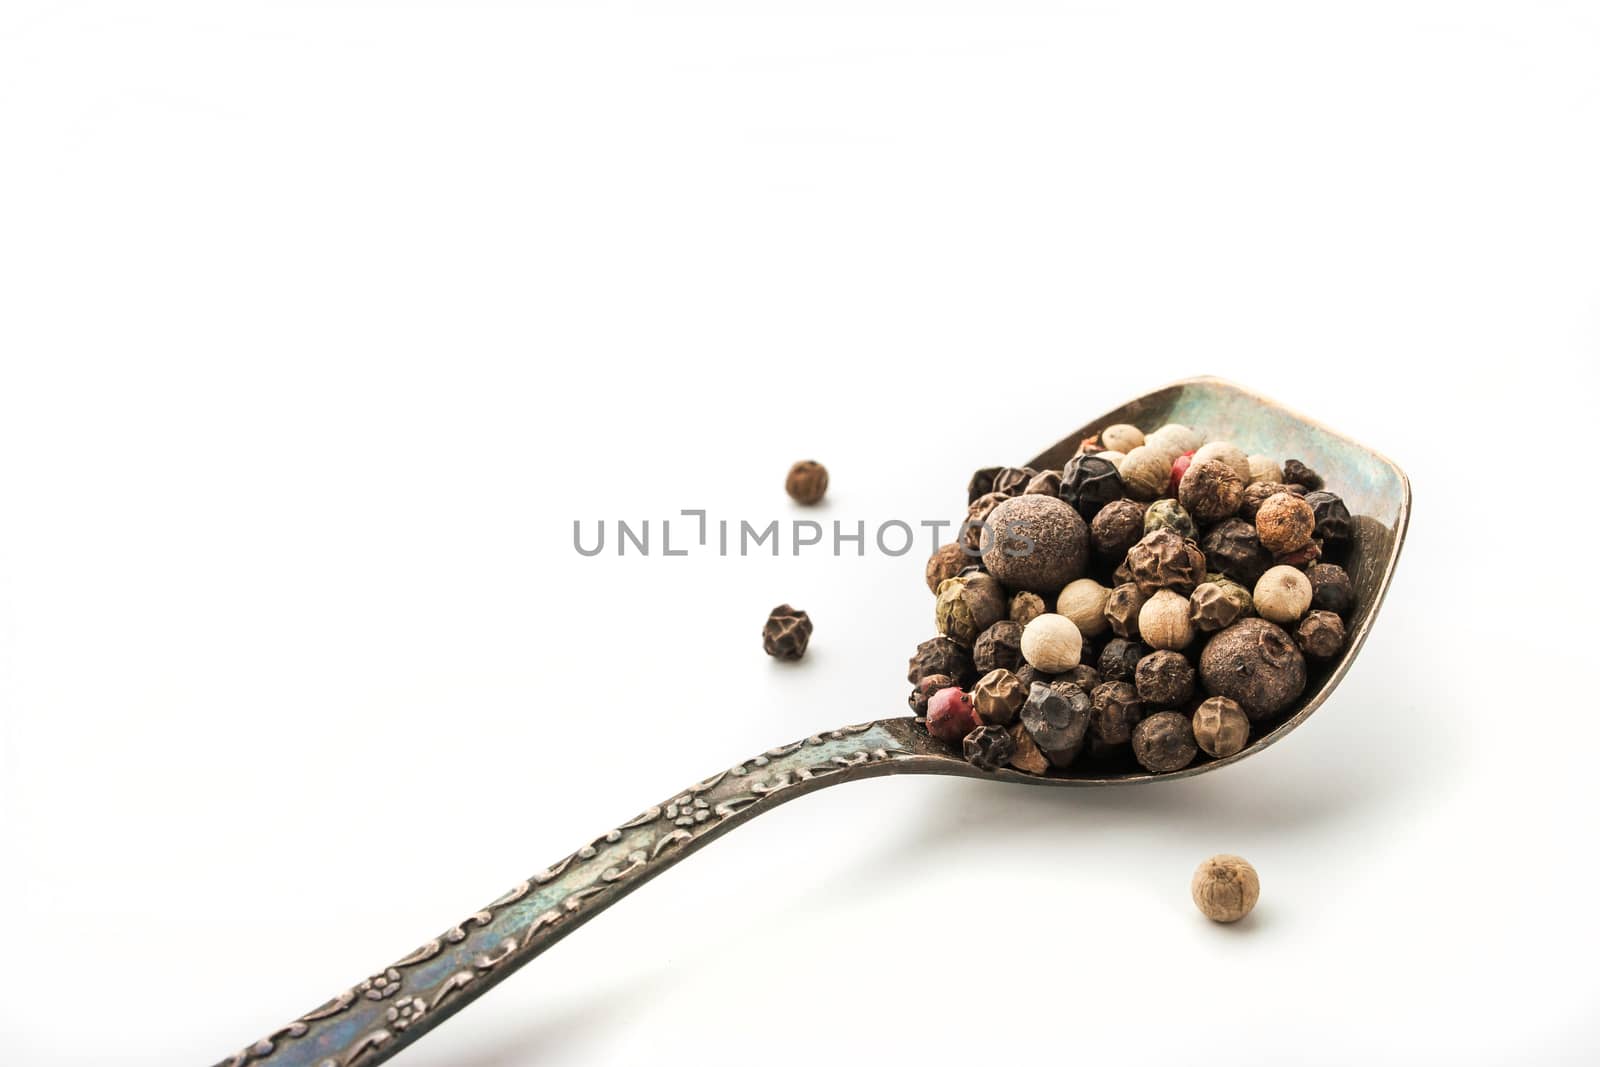 Pepper mix in the vintage metal spoon  at the  right